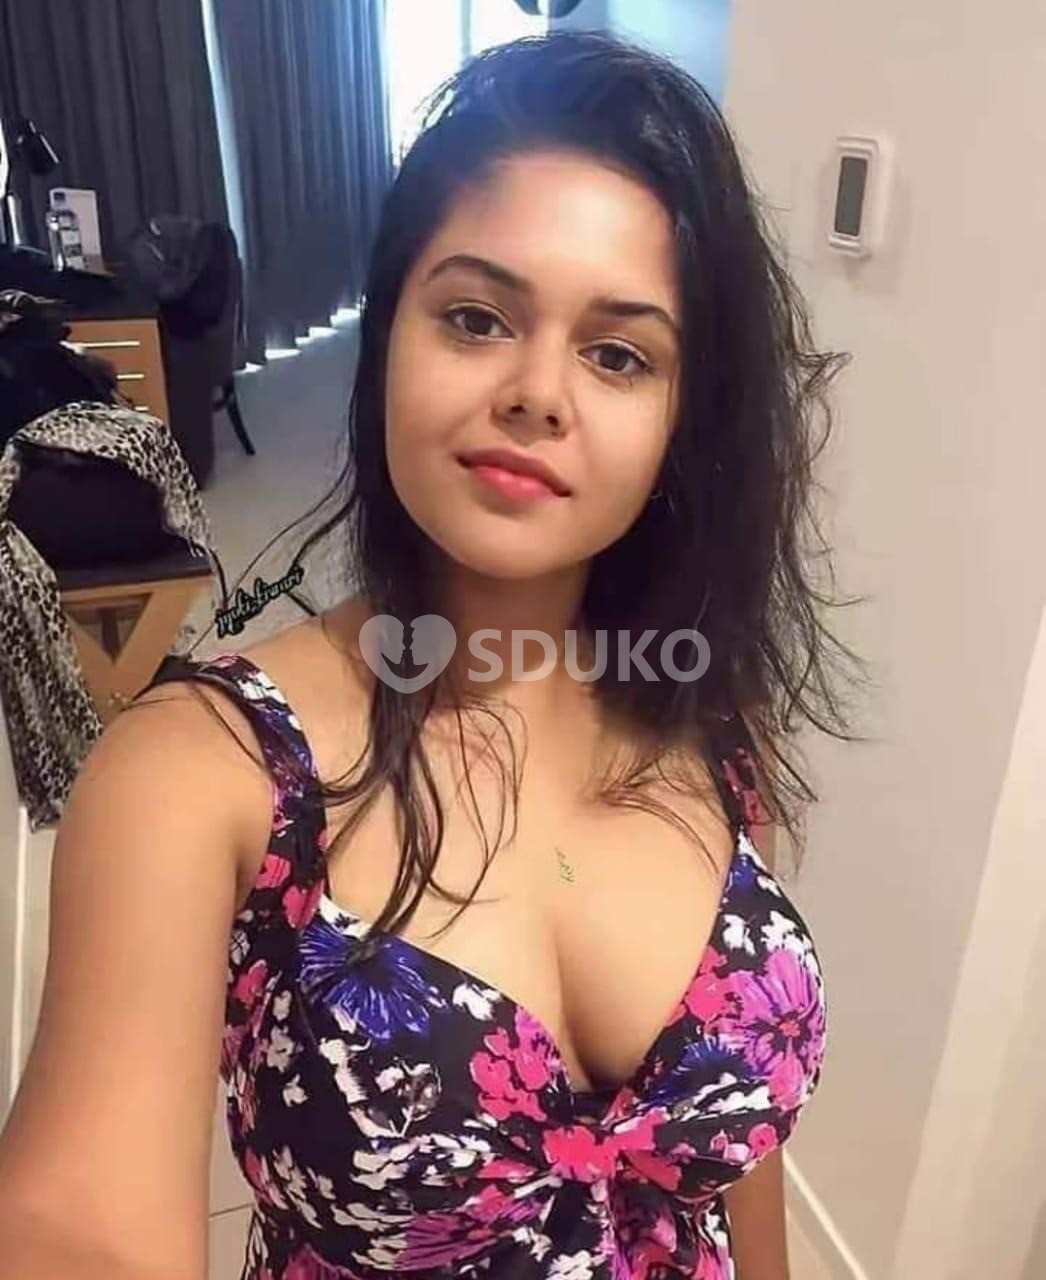 JAYANAGAR 💯 ✅ CALL GIRL SERVICE LOW PRICE 24/7 AVAILABLE SERVICE 100% GUARANTEED INDEPENDENT ESCORT SERVICE ABL